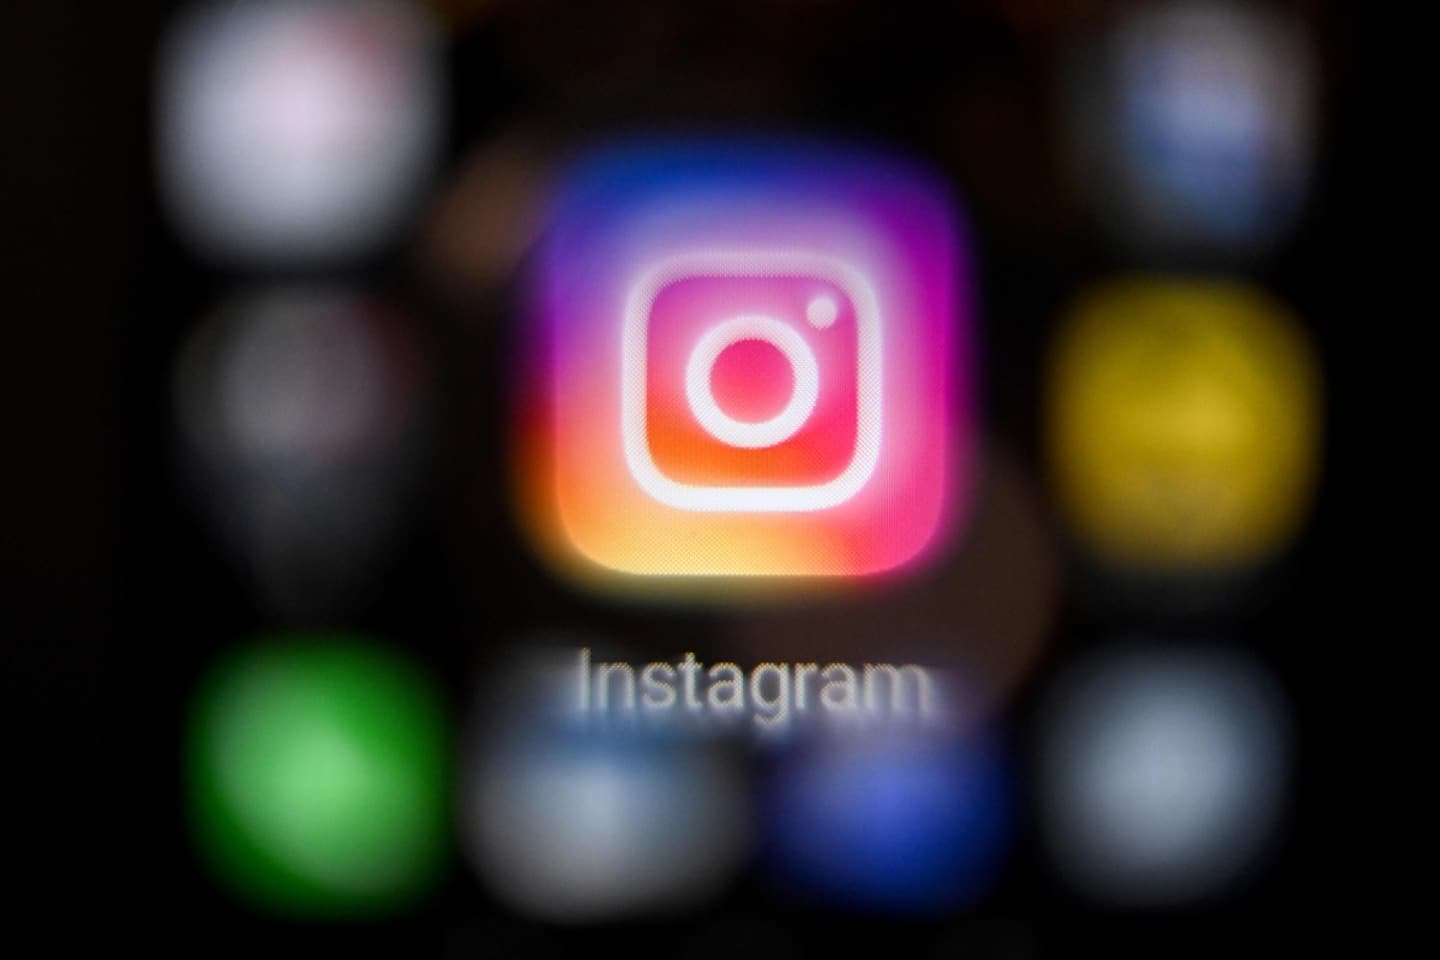 Instagram reports problems connecting to the social network